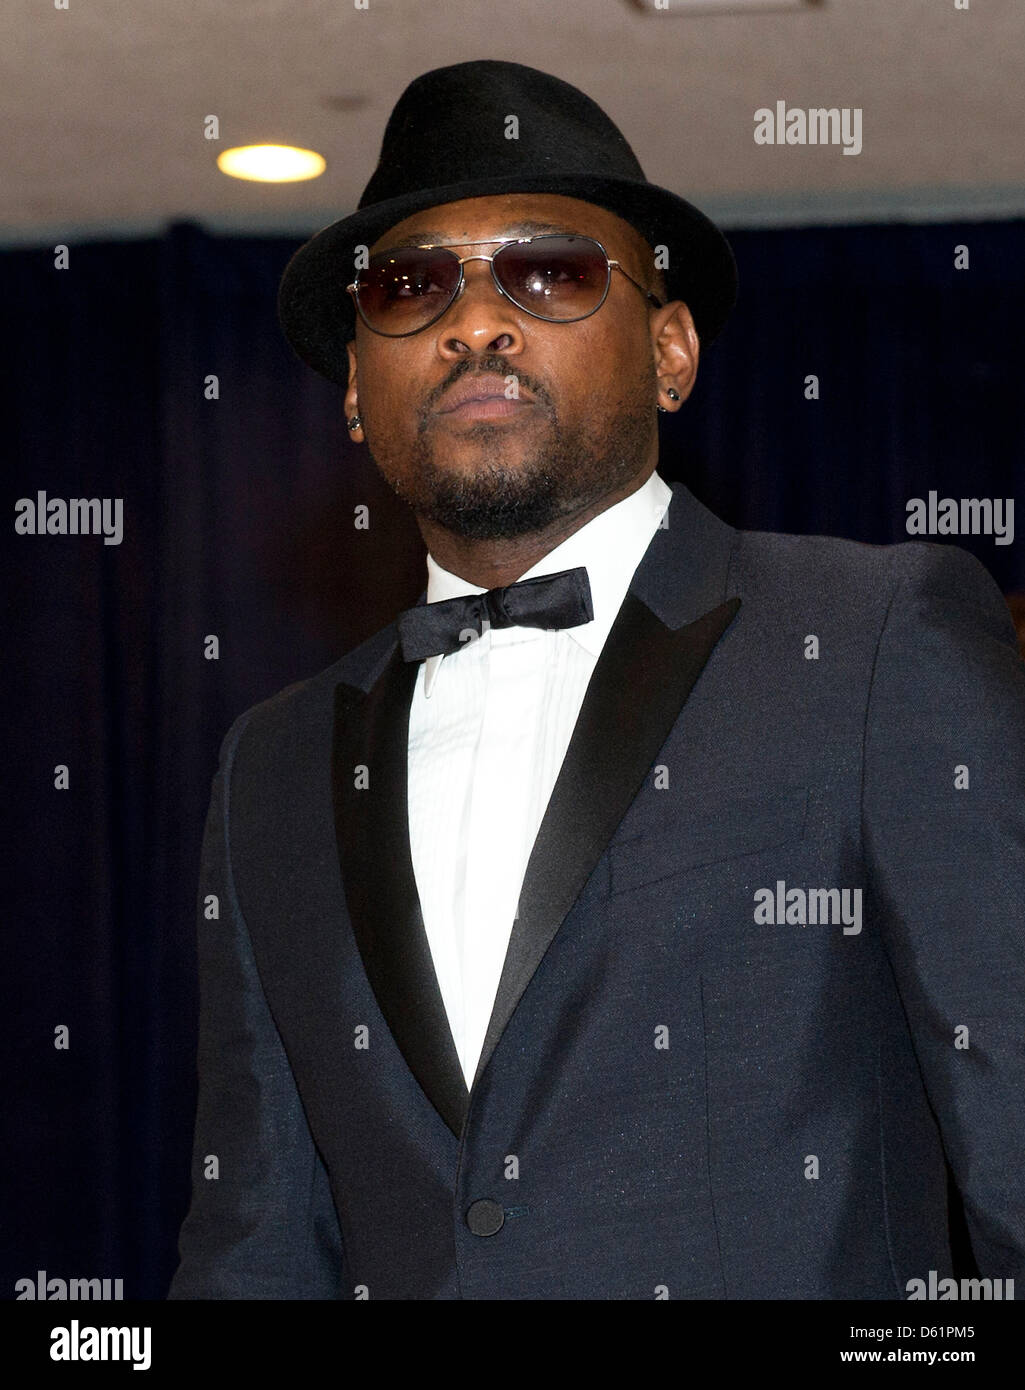 US actor, singer, songwriter, and record producer Omar Epps arrives for the 2012 White House Correspondents Association Dinner held at a hotel in Washington, DC, USA, on 28 April 2012. Photo: Ron Sachs / CNP (ATTENTION: Embargo until 4:00 PM EDT, Sunday, April 29, 2012 - NO New York or New Jersey Newspapers or newspapers within a 75 mile radius of New York City) Stock Photo